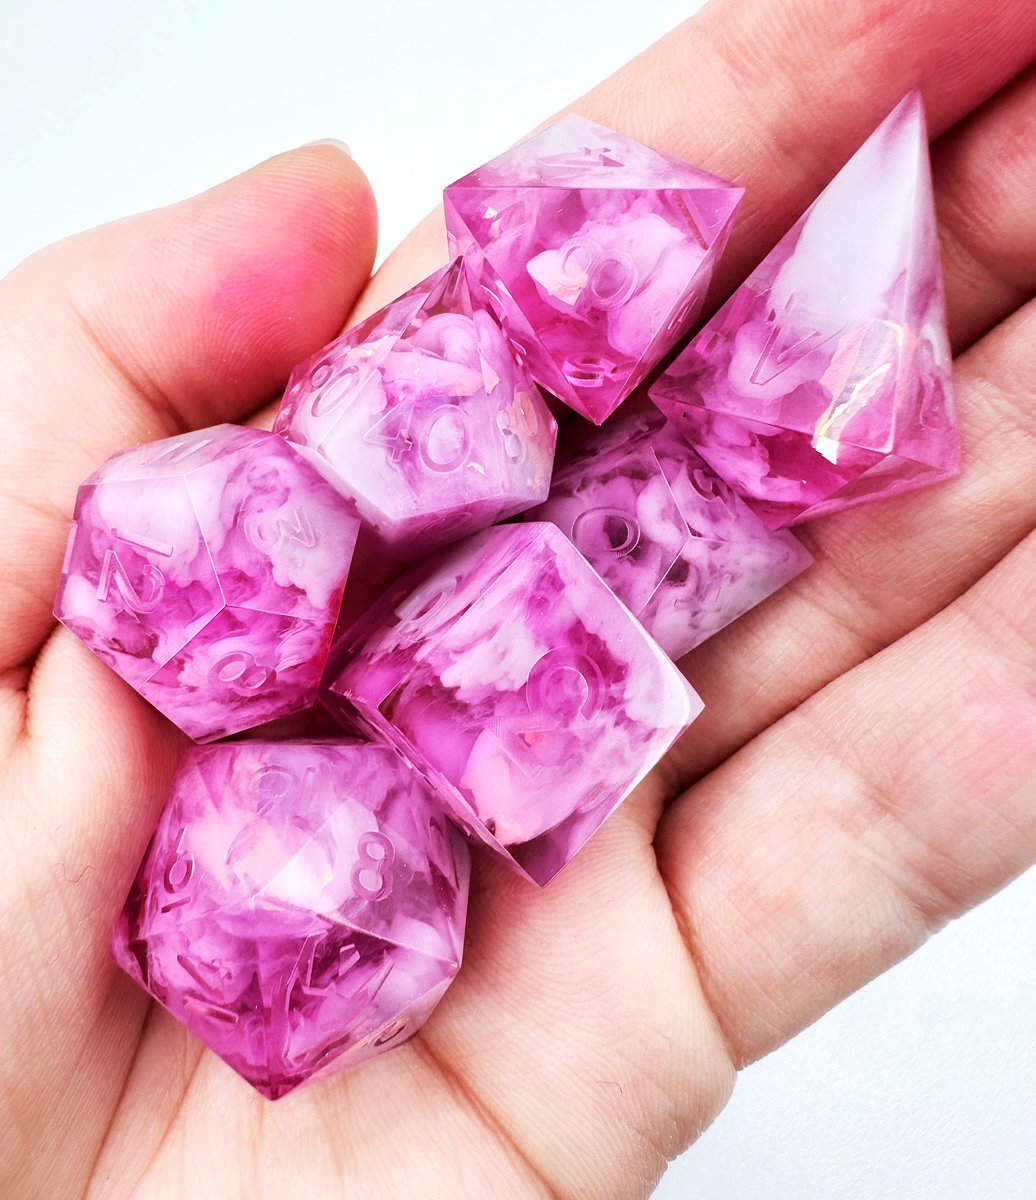 I found out that not many people like pink dice. If you do, Ive got you covered 💖

#dnddice #handmadedice #dicemaking #dnd